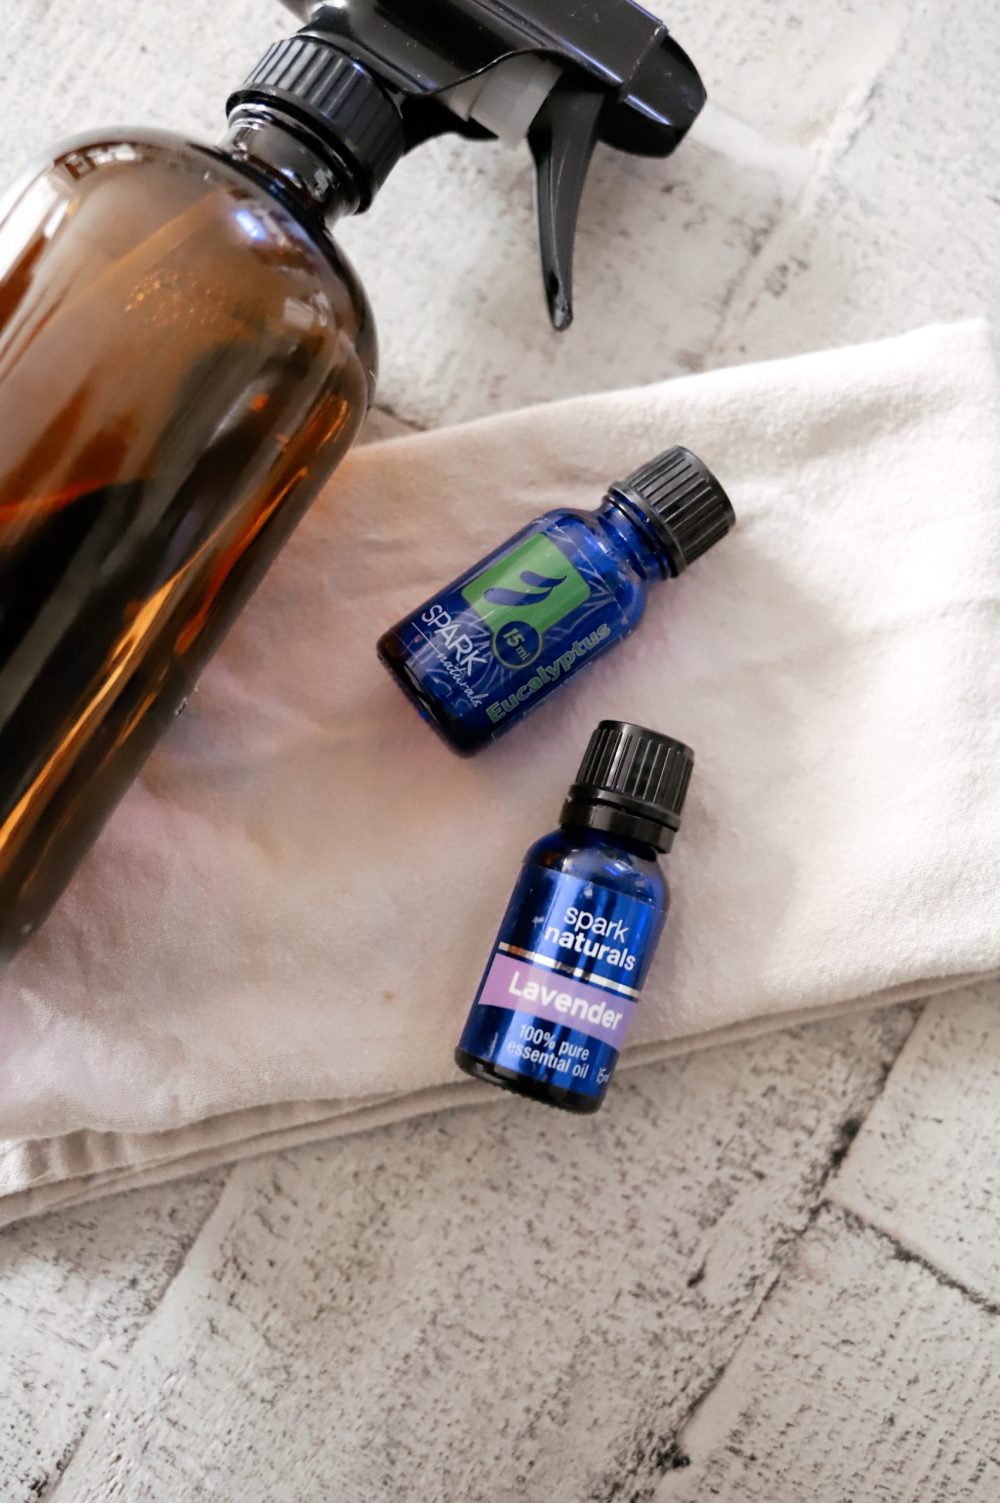 Essential Oils Safe for Dog Deodorizer Spray |Dog Deodorizer Spray by popular Florida lifestyle blog, Fresh Mommy Blog: image of a glass amber spray bottle lying next to a bottle of Spark Naturals eucalyptus oil and Spark Naturals Lavender oil. 